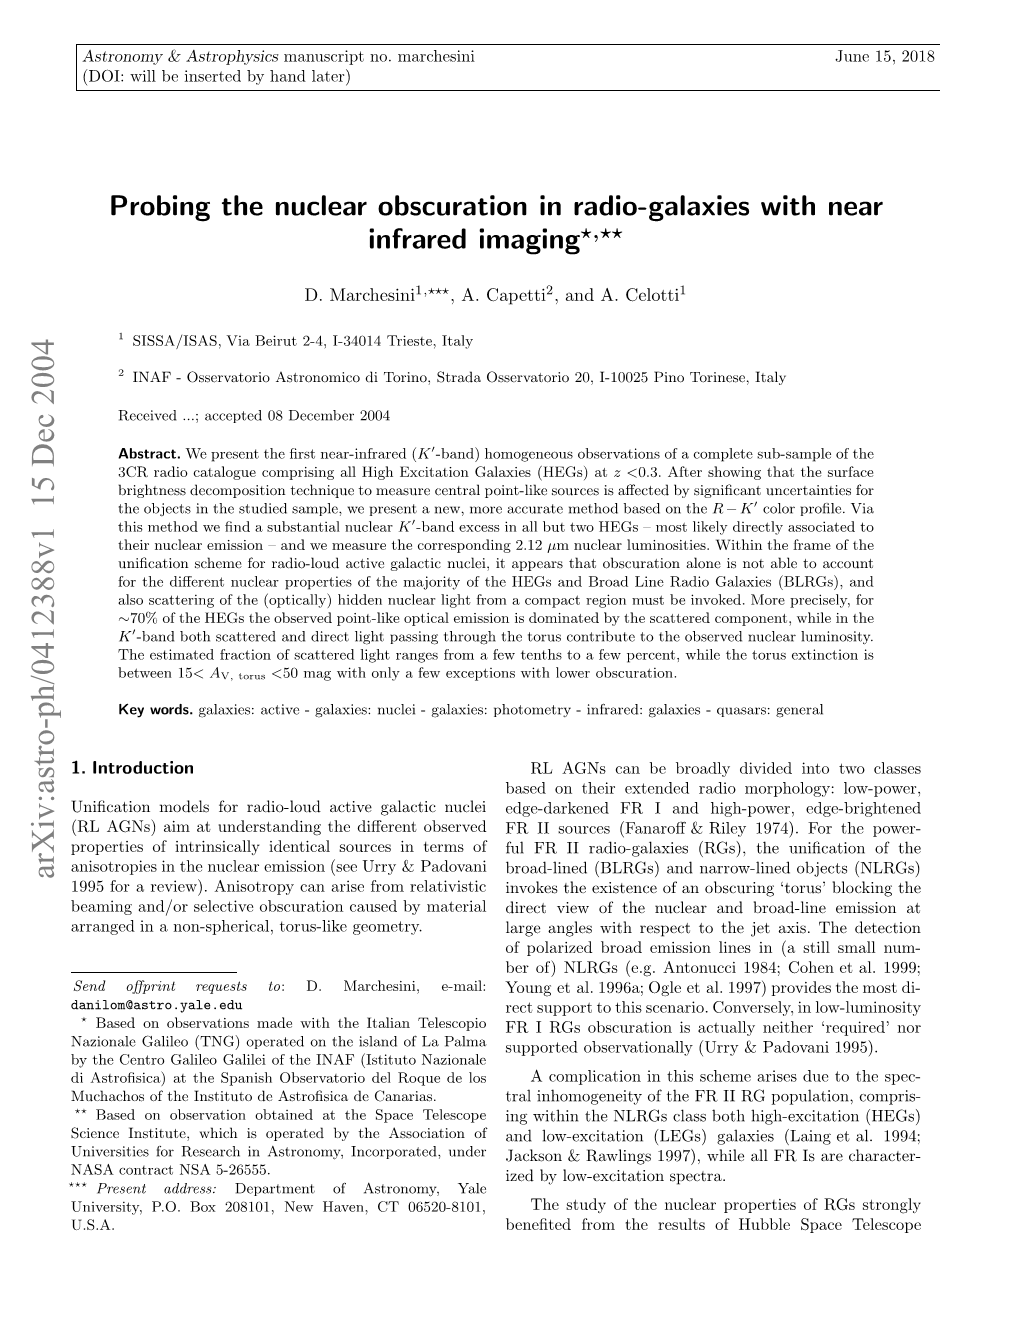 Probing the Nuclear Obscuration in Radio-Galaxies with Near Infrared